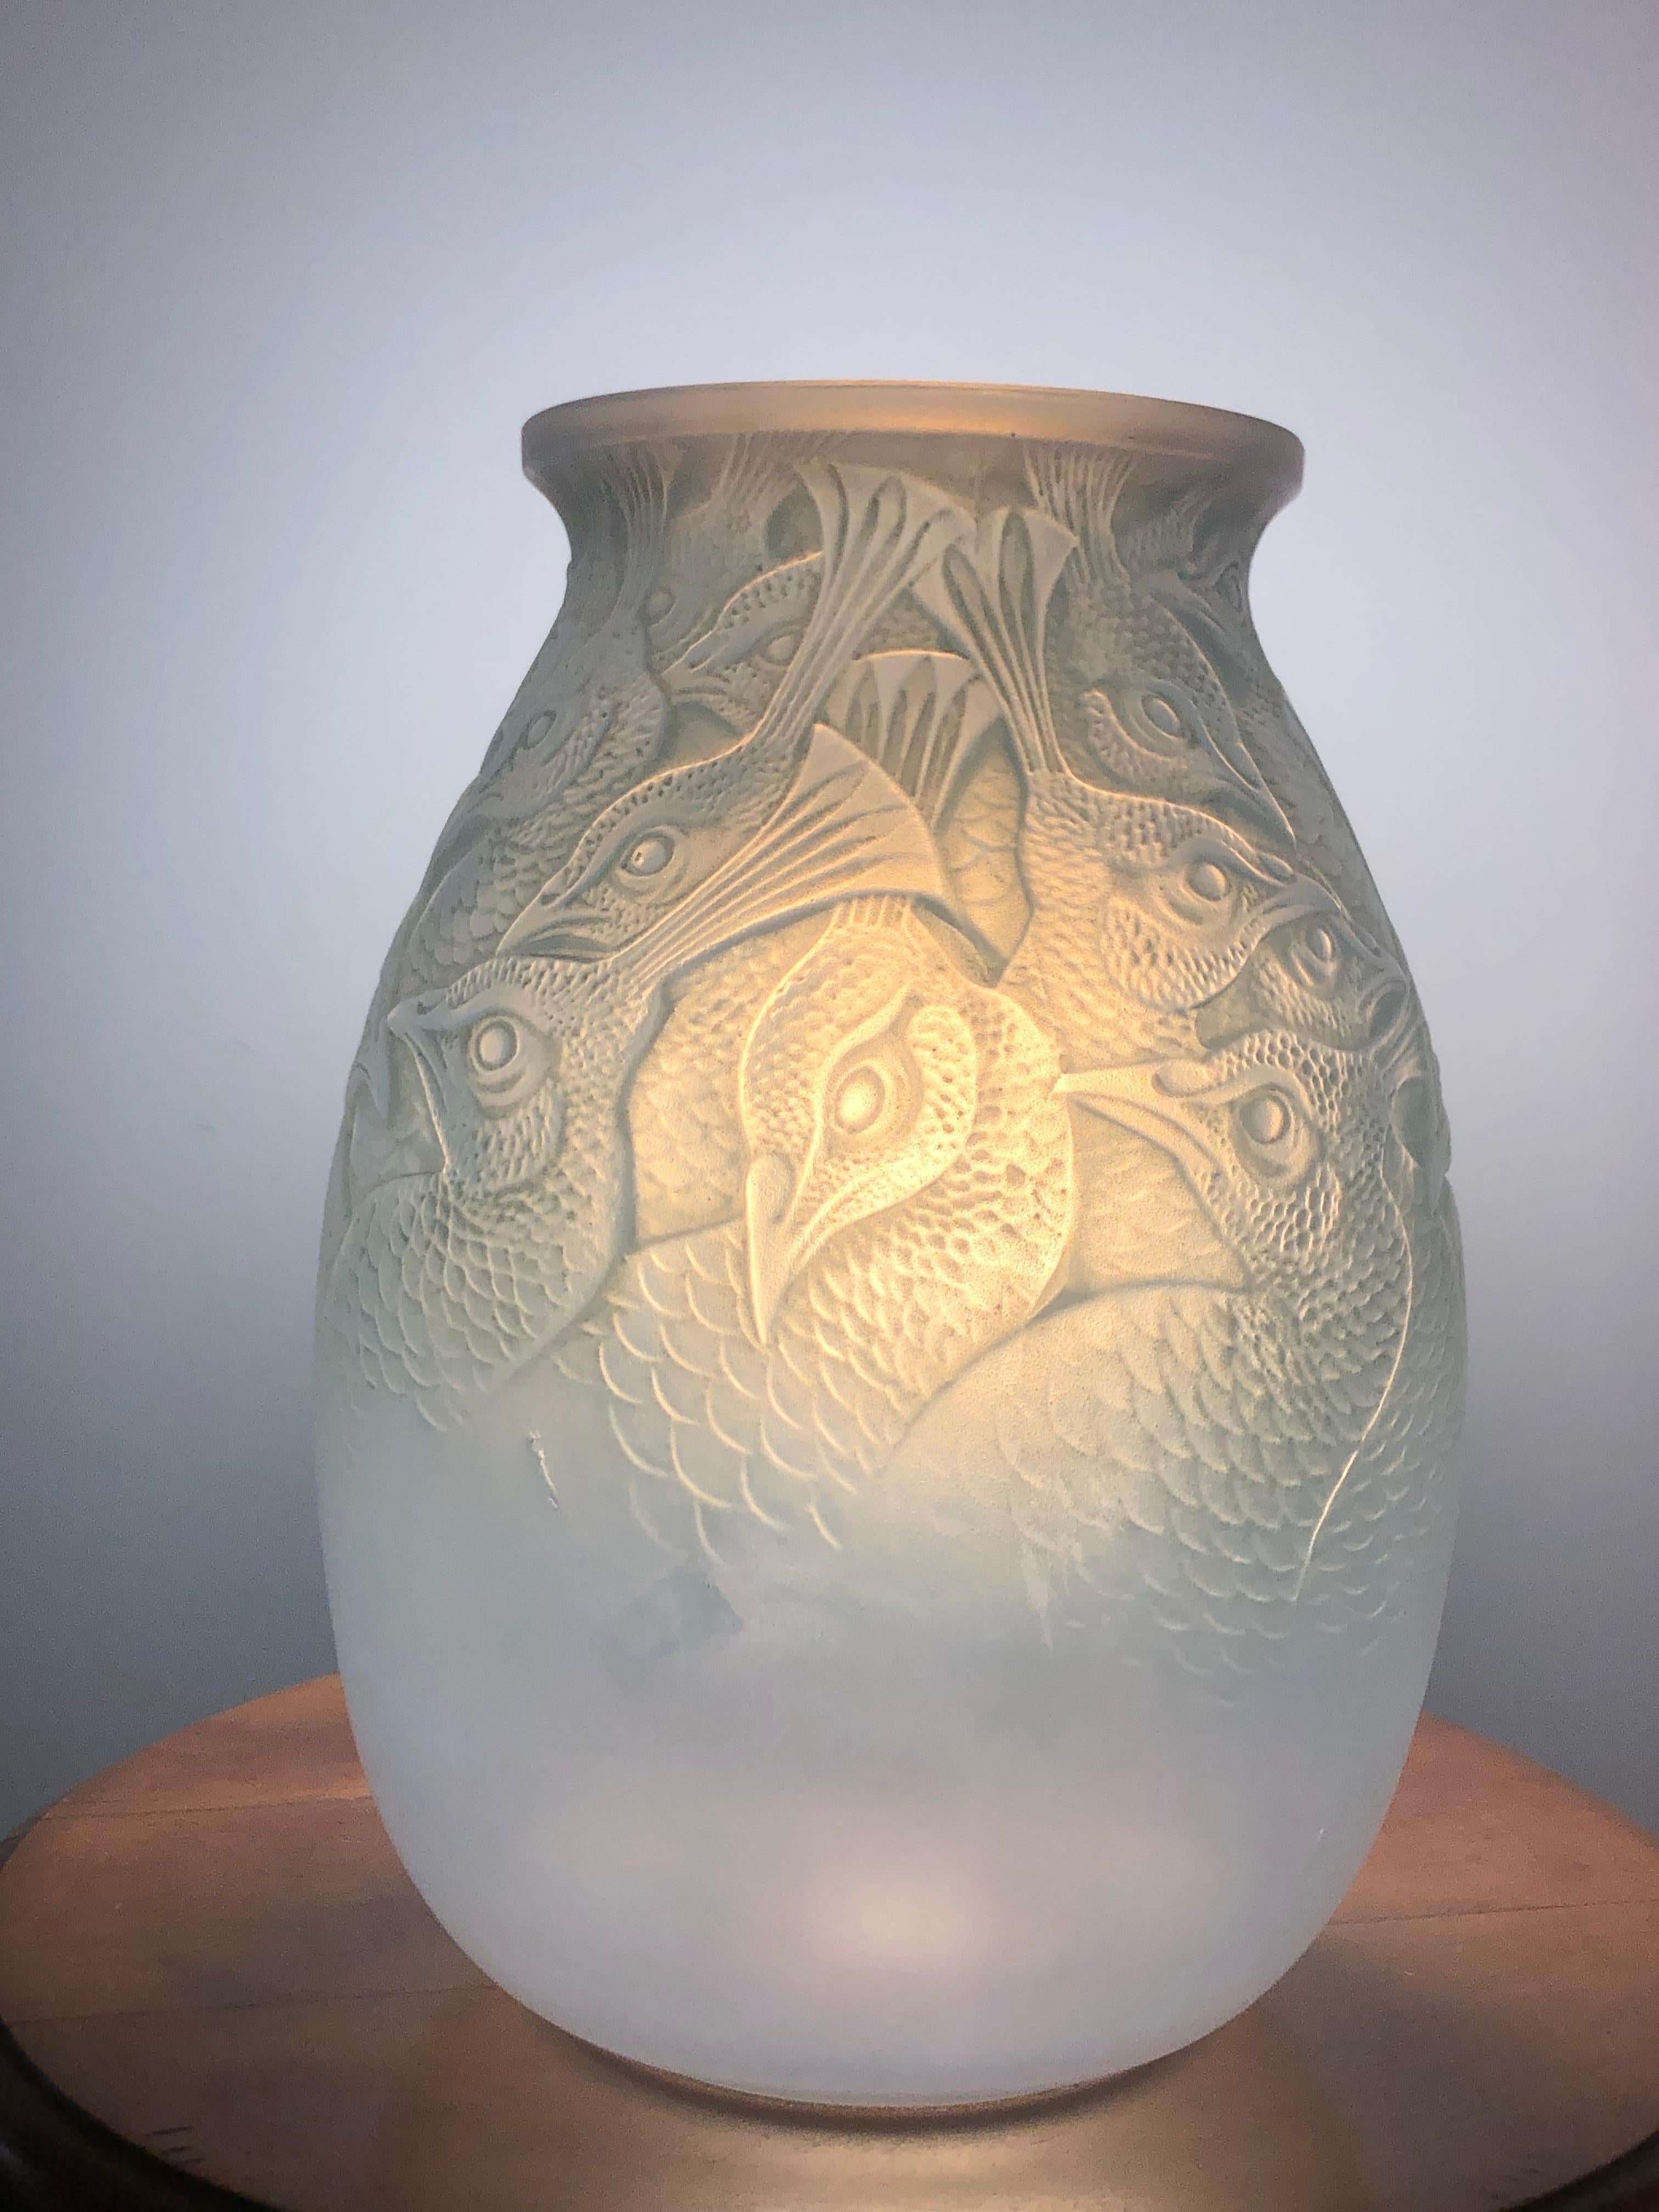 French 1928 Rene Lalique Borromee Vase in Double Cased Opalescent Glass Stain Peacocks